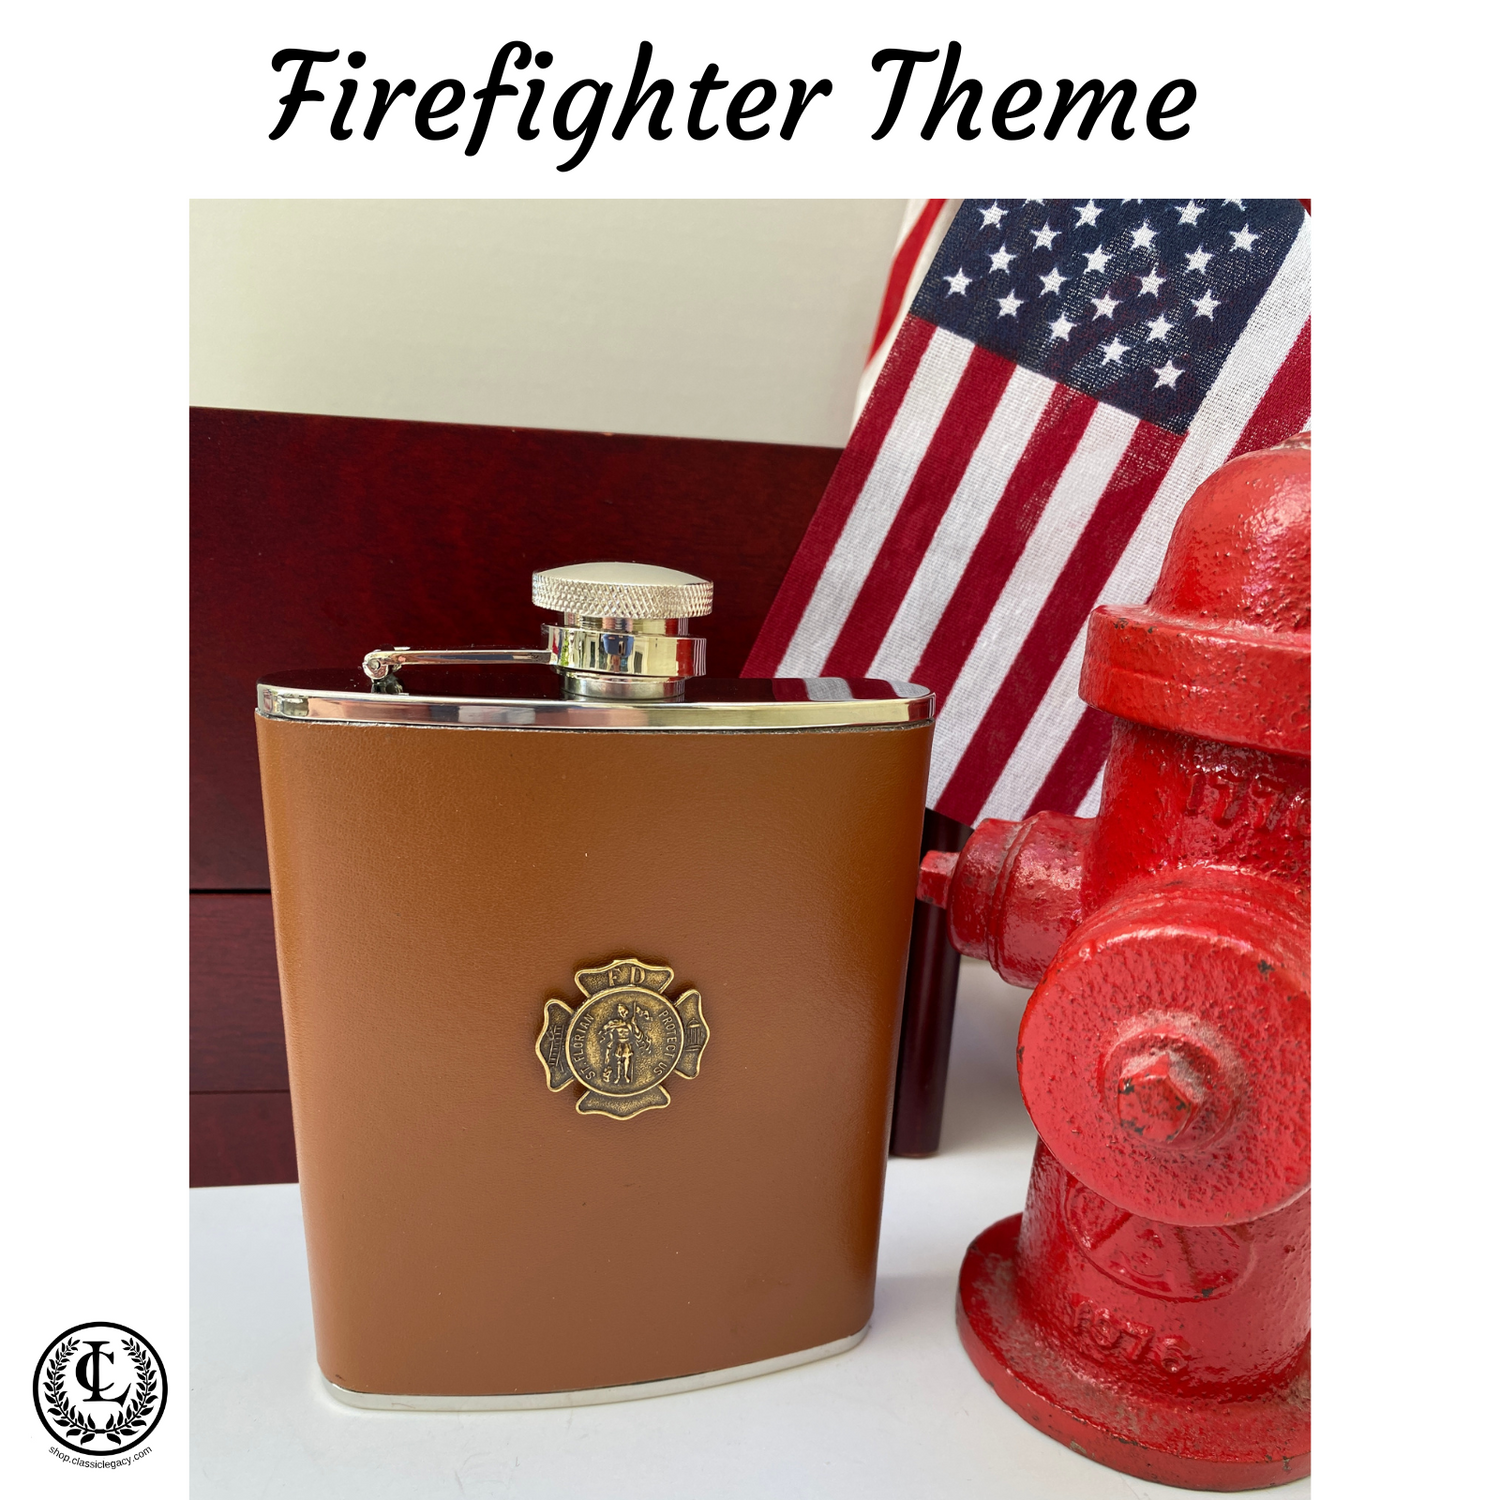 Firefighter Gifts and Jewelry